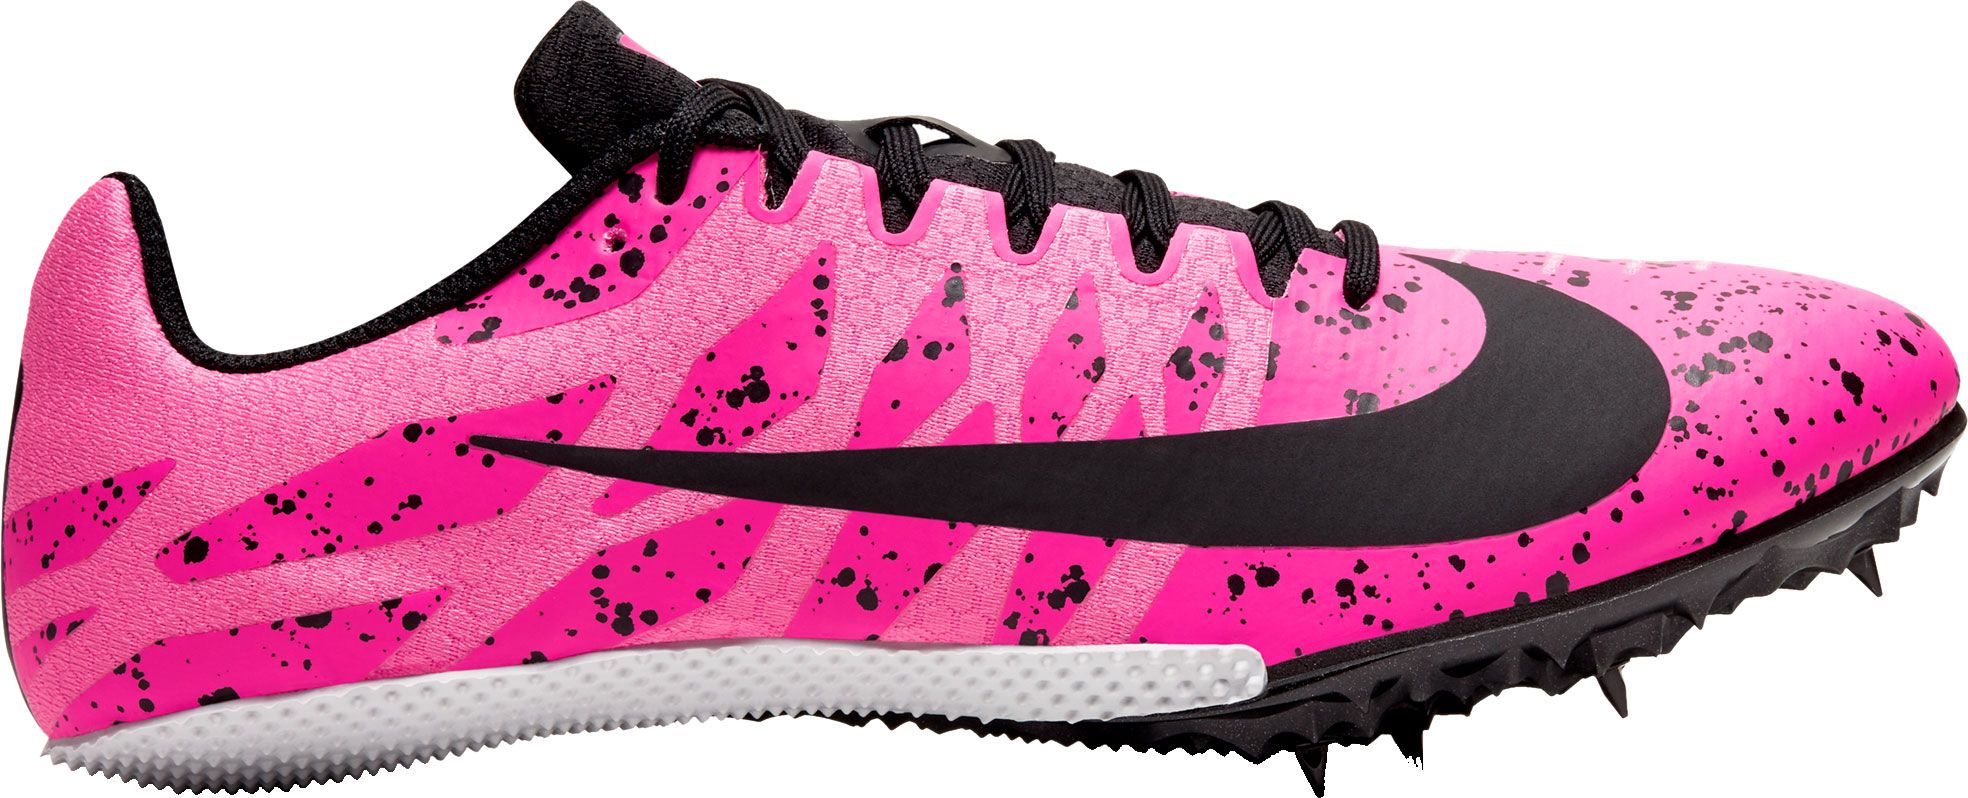 pink spikes track